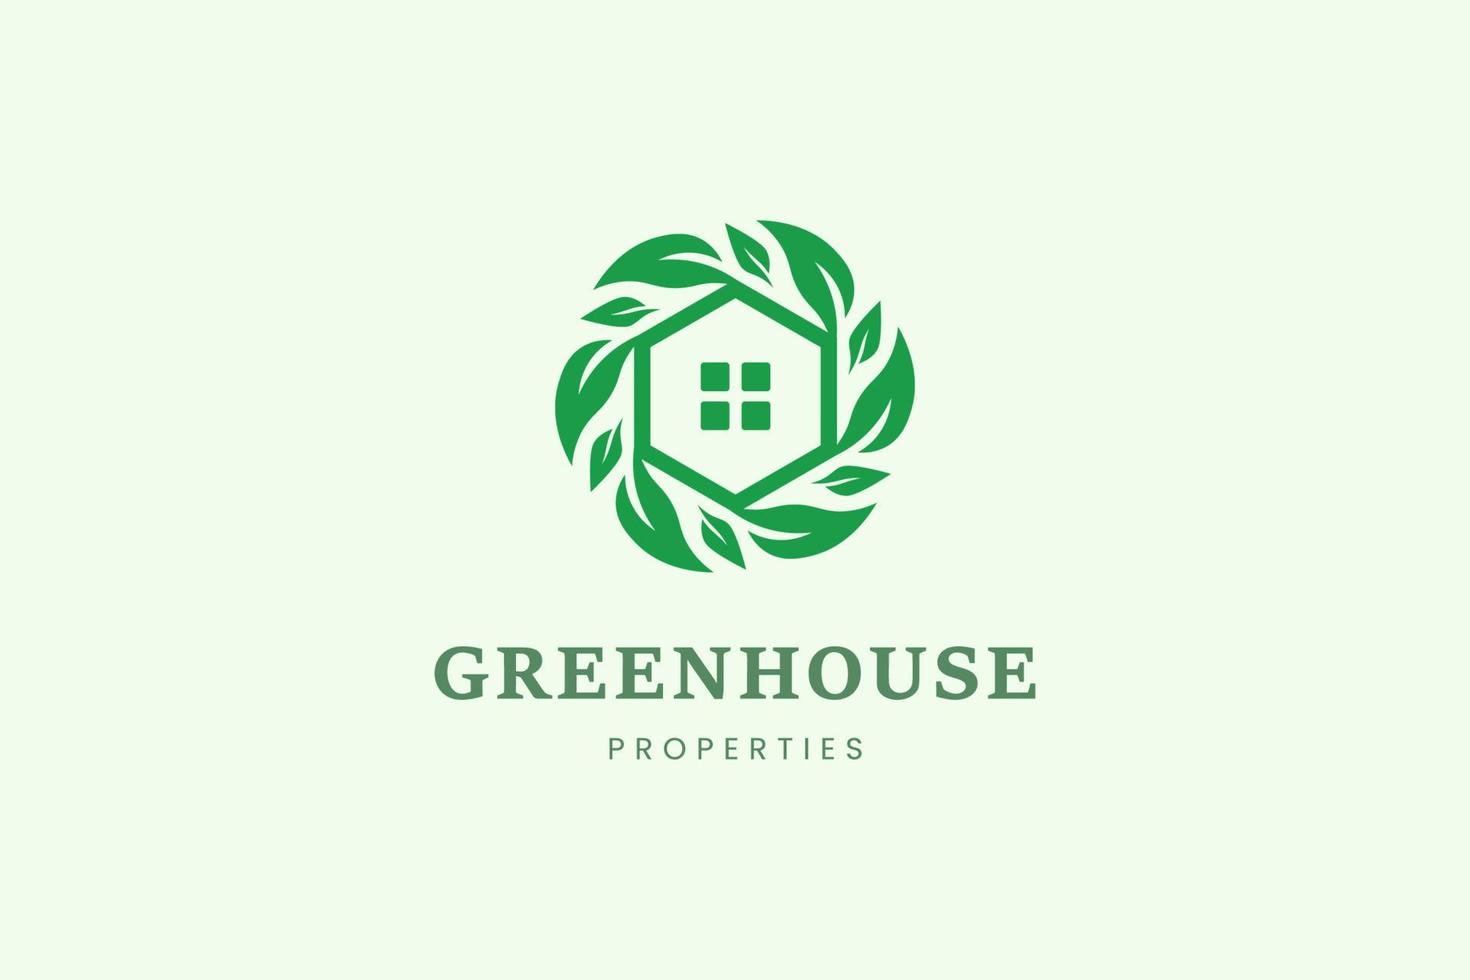 Home and leaf tree logo template for property or real estate business vector